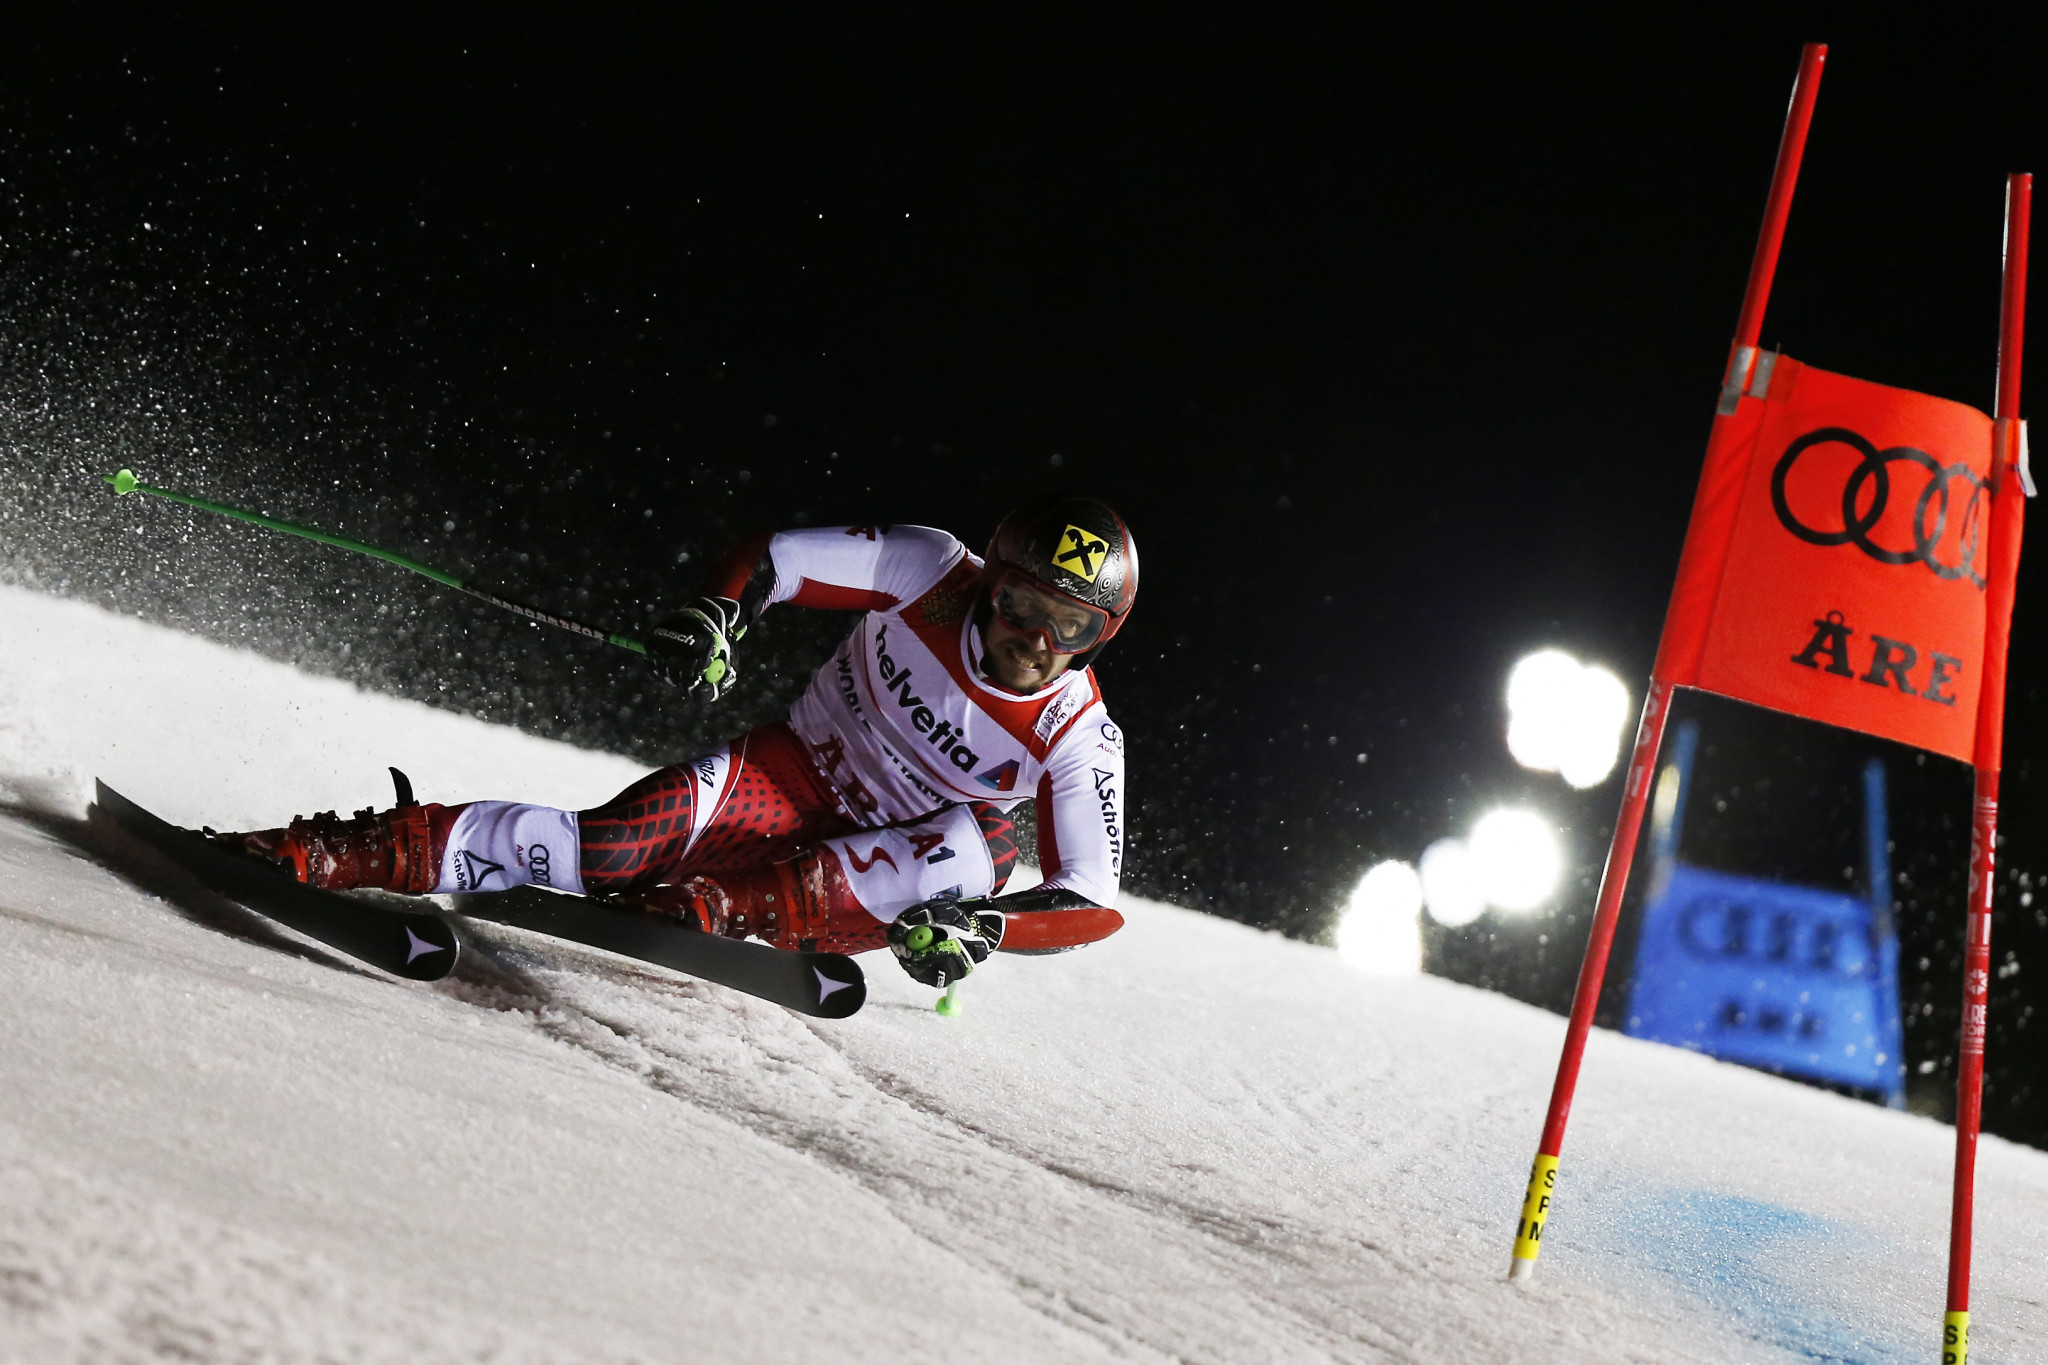 Austria's defending champion Marcel Hirscher had to settle for the silver medal ©Getty Images